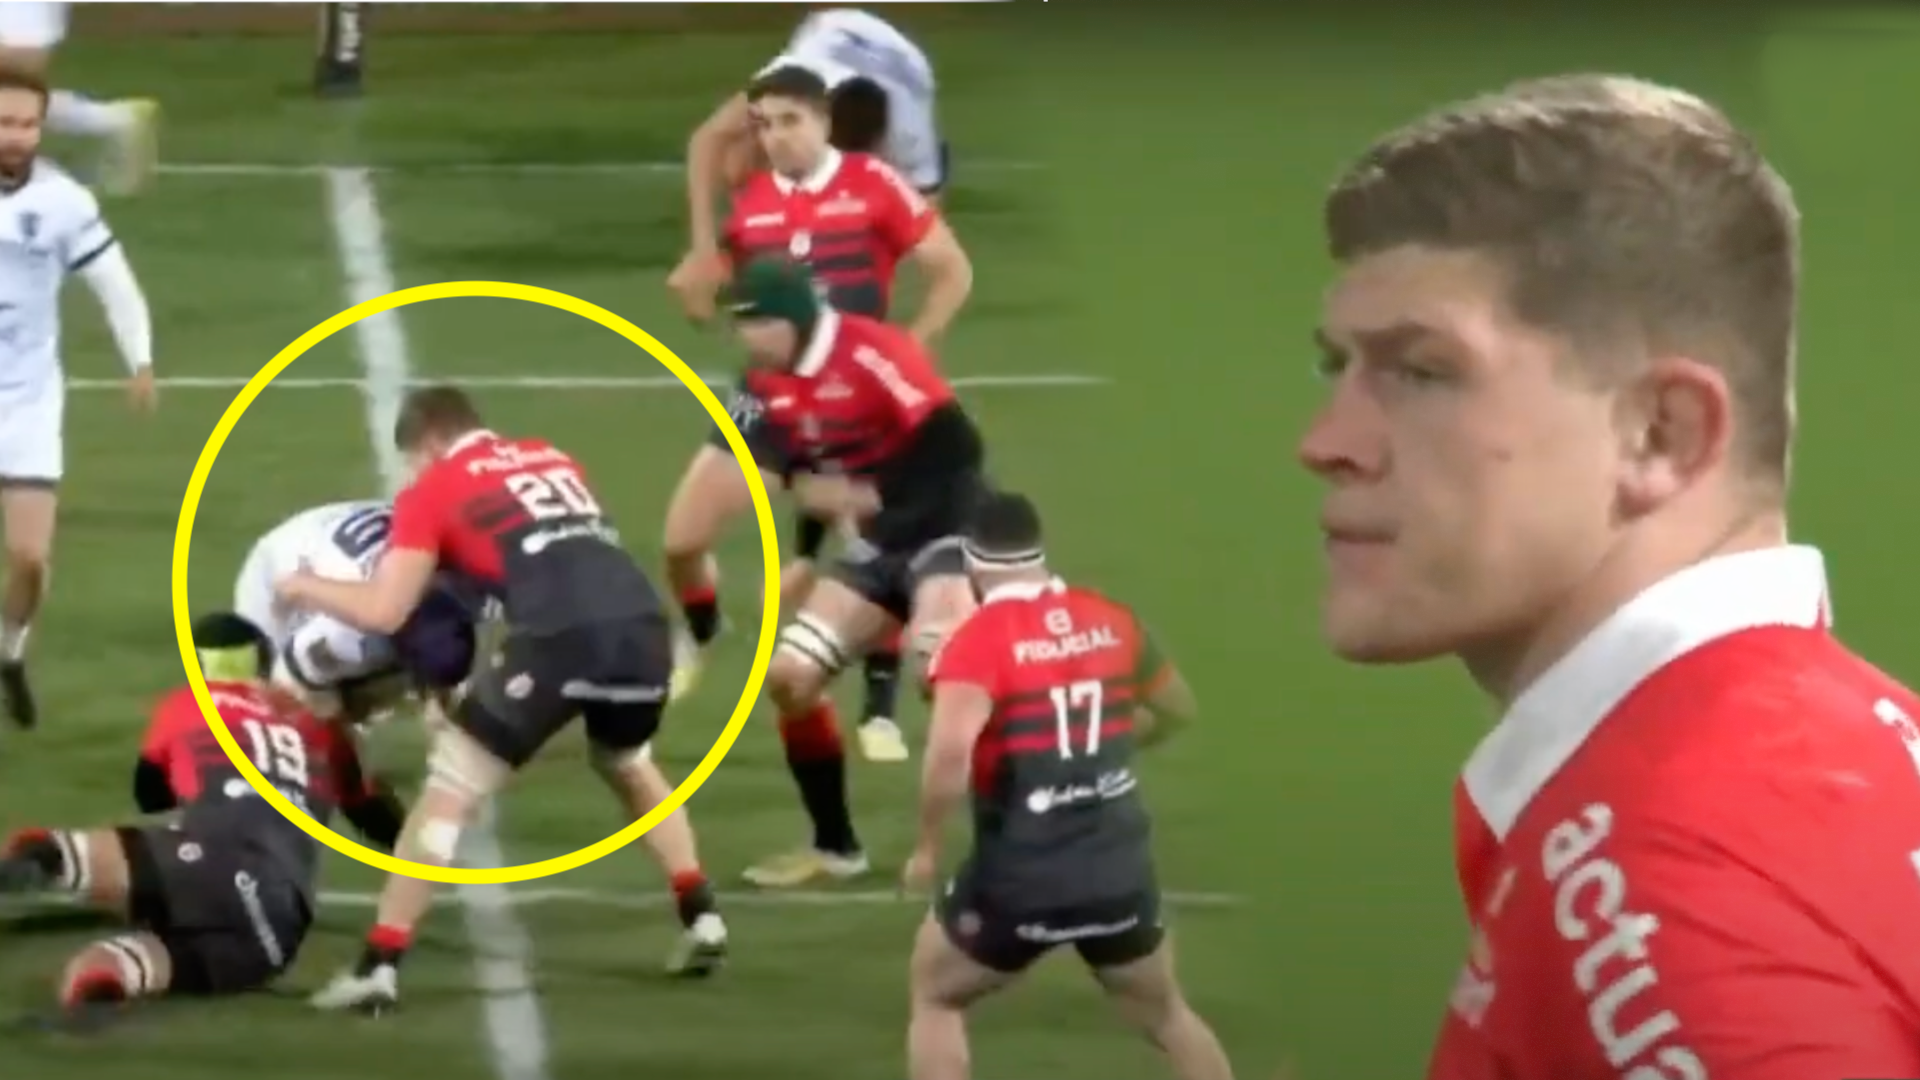 WATCH: Jack Willis dropped by England just days after destroying Top 14 champs